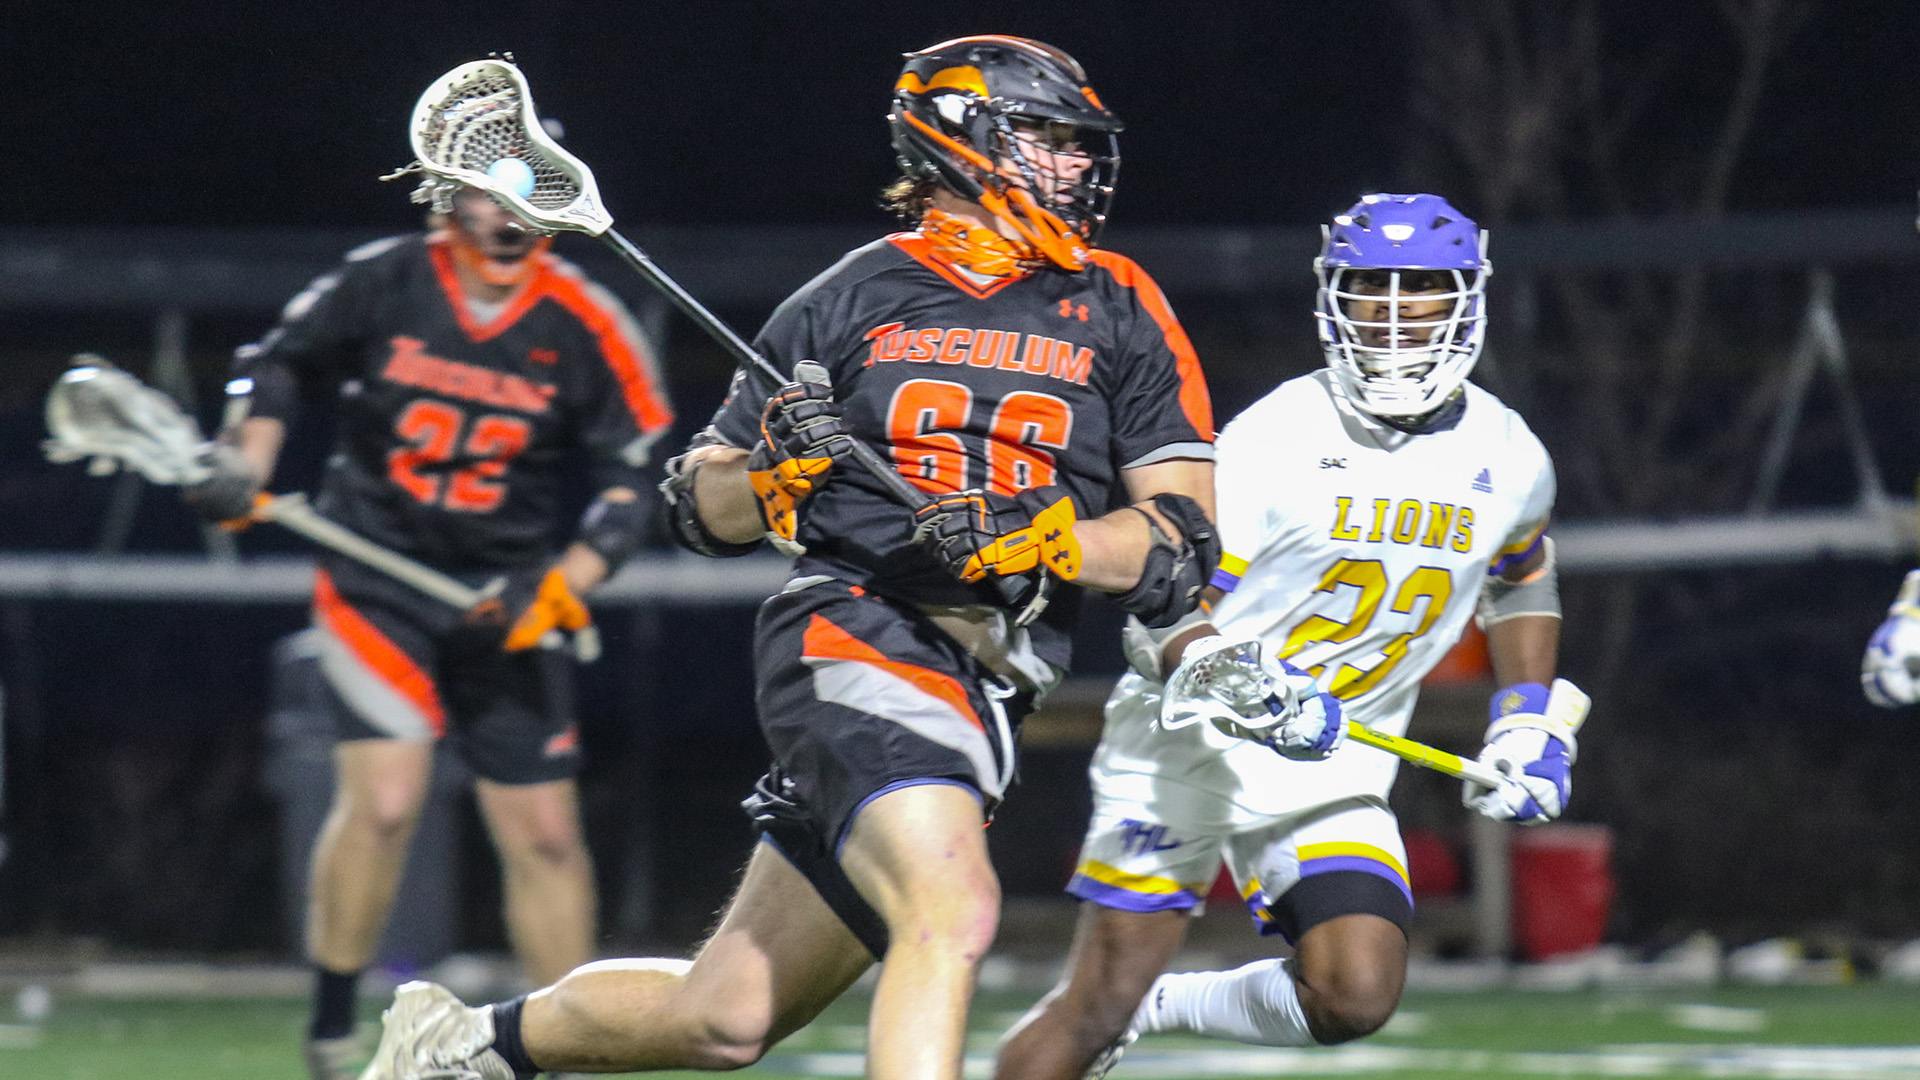 Nate Raymond scored two fourth-quarter goals to lift the Pioneers to the win (photo by Kevin Holley)